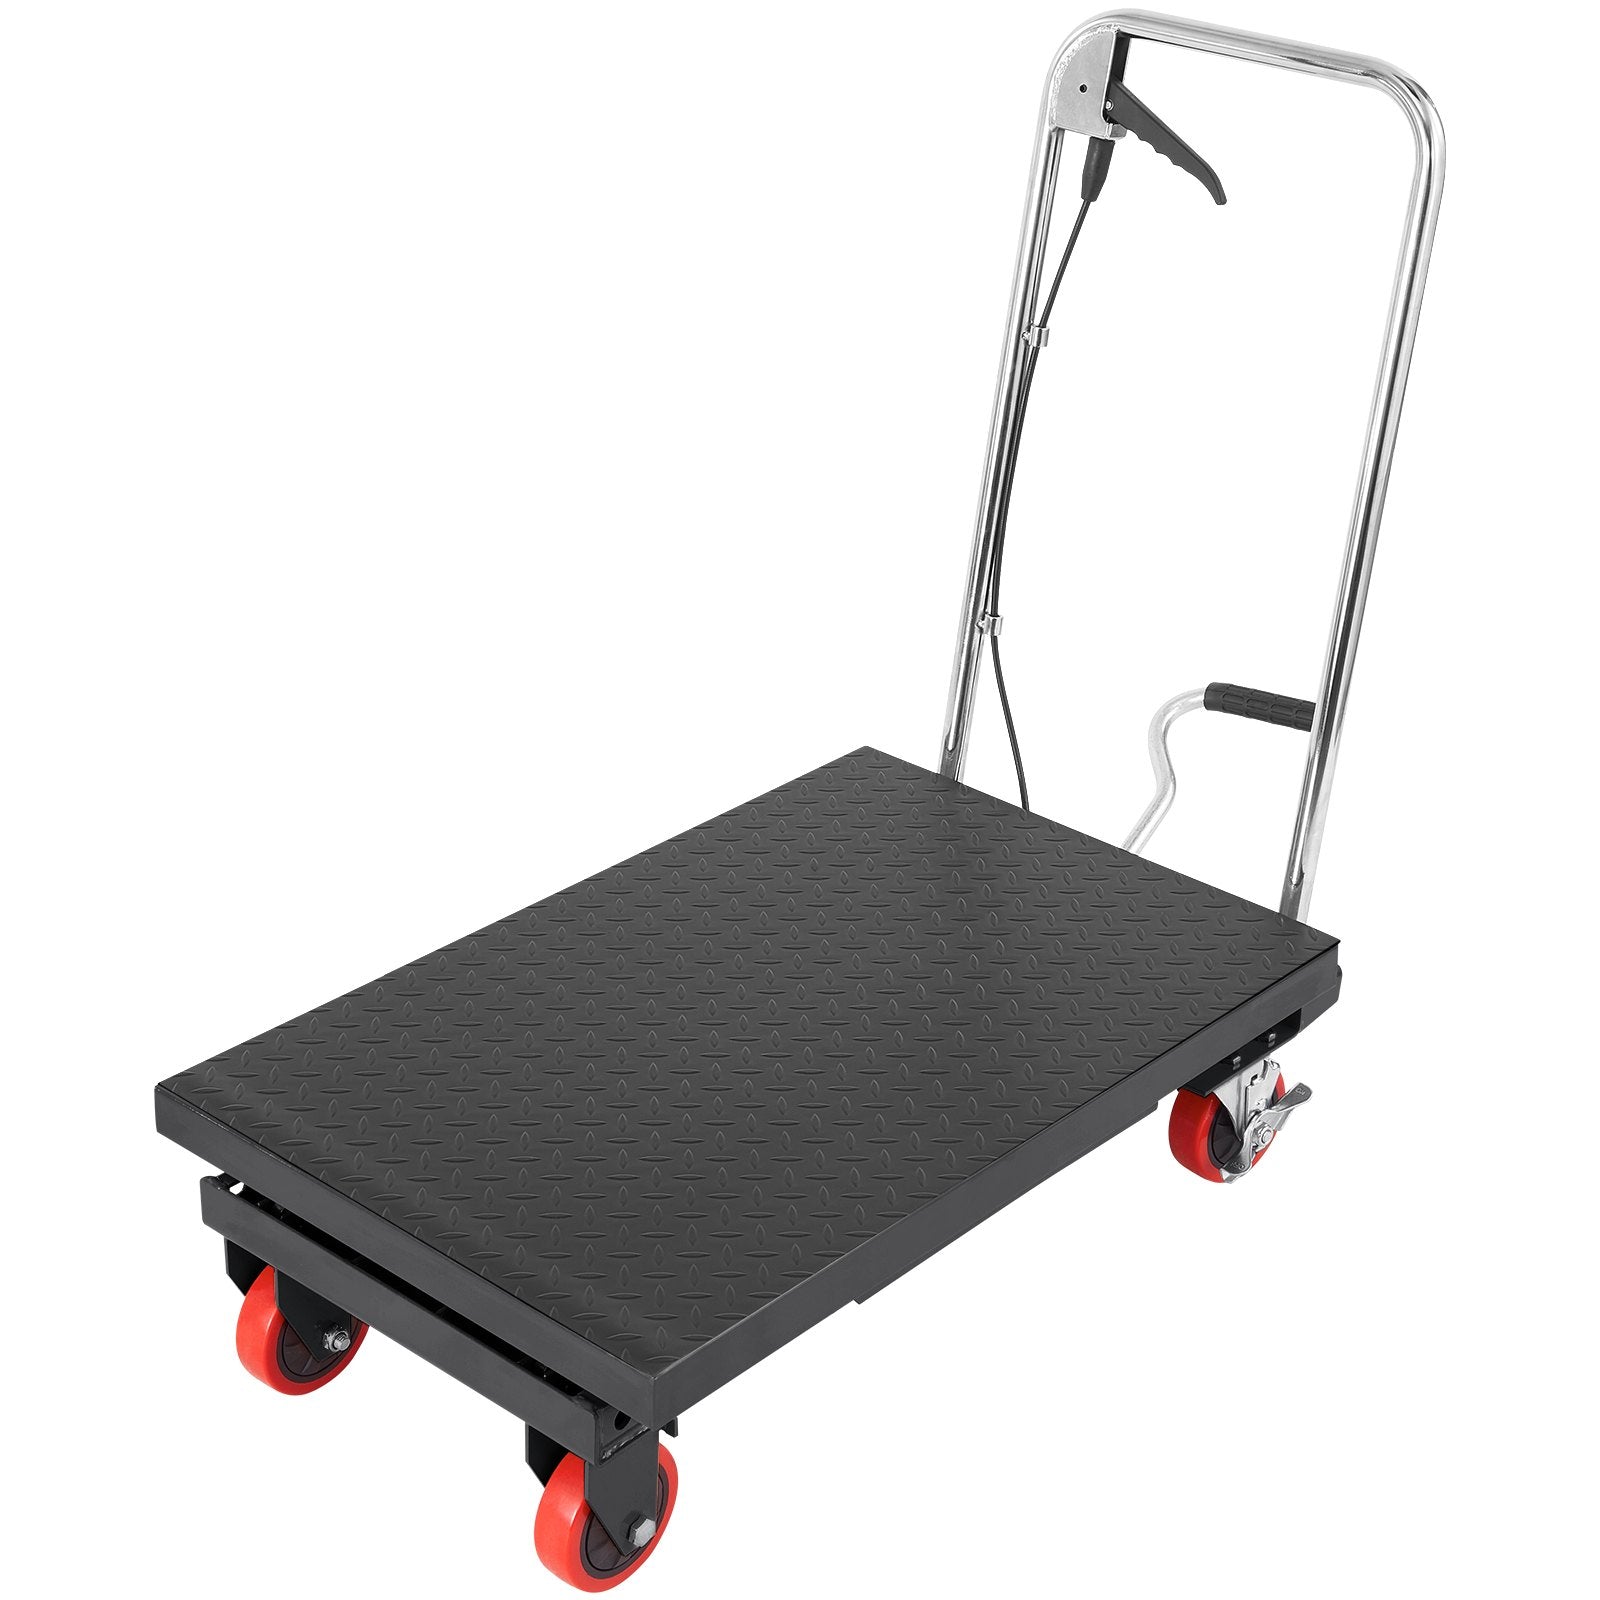 VEVOR Hydraulic Lift Table Cart, 500lbs Capacity 28.5" Lifting Height, Manual Single Scissor Lift Table with 4 Wheels and Non-slip Pad